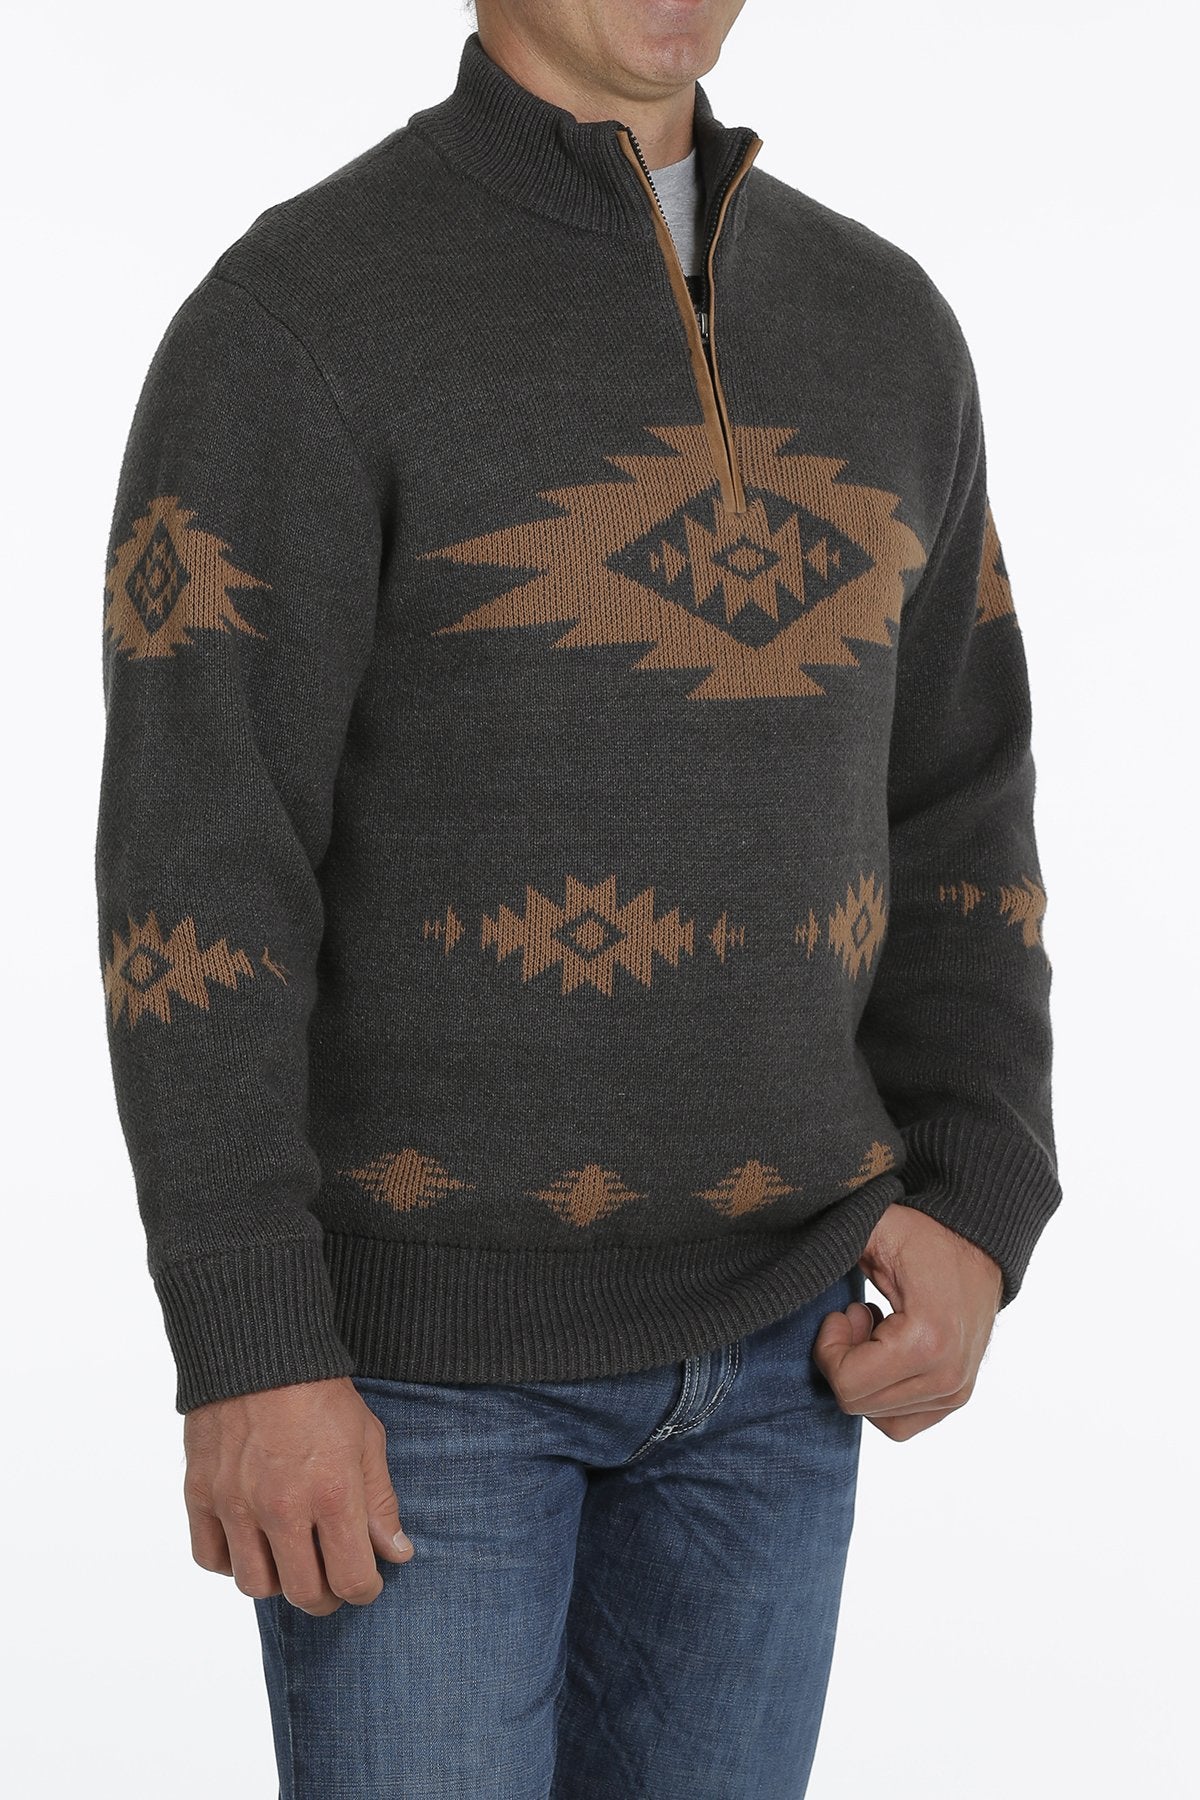 CINCH MEN'S PULLOVER SWEATER in Charcoal / Brown MWK1560001 CHR